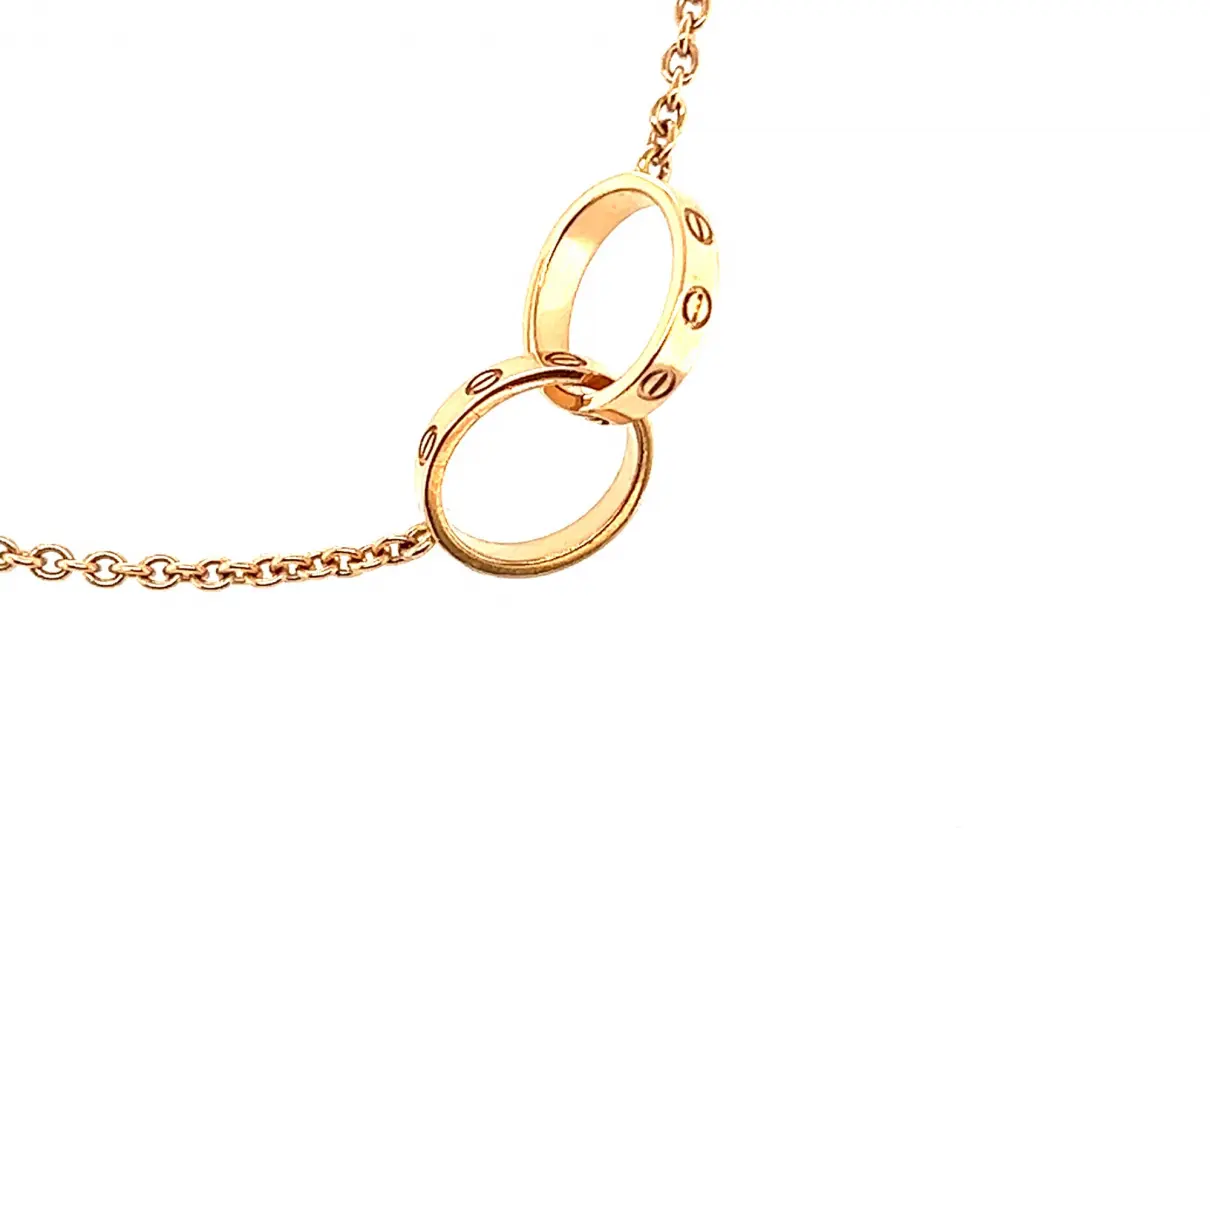 Buy Cartier Pink gold necklace online